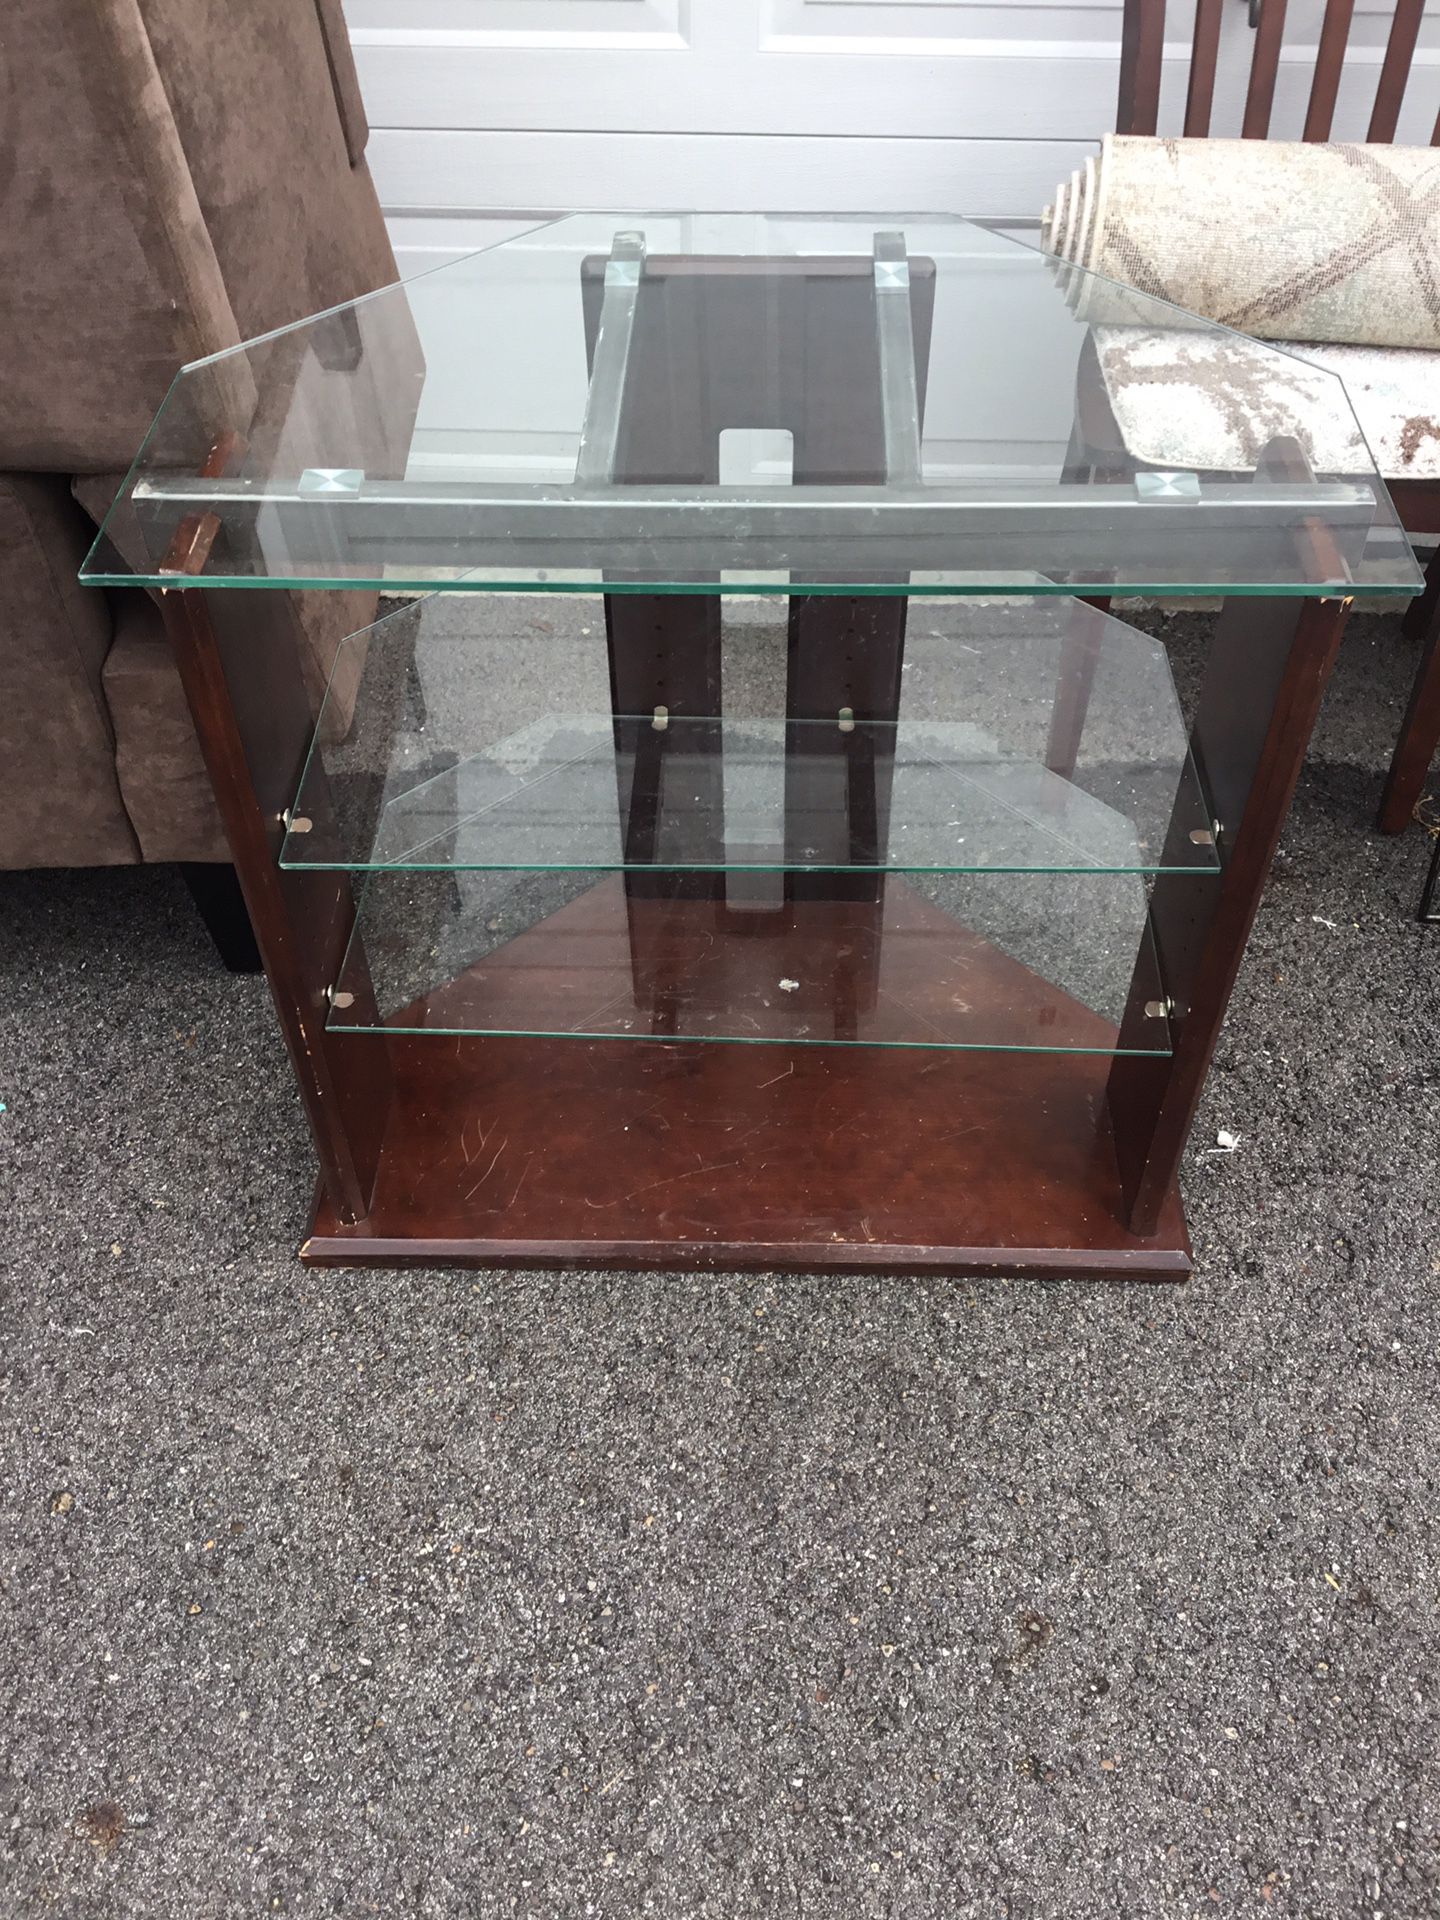 TV Entertainment Stand With Glass Shelves